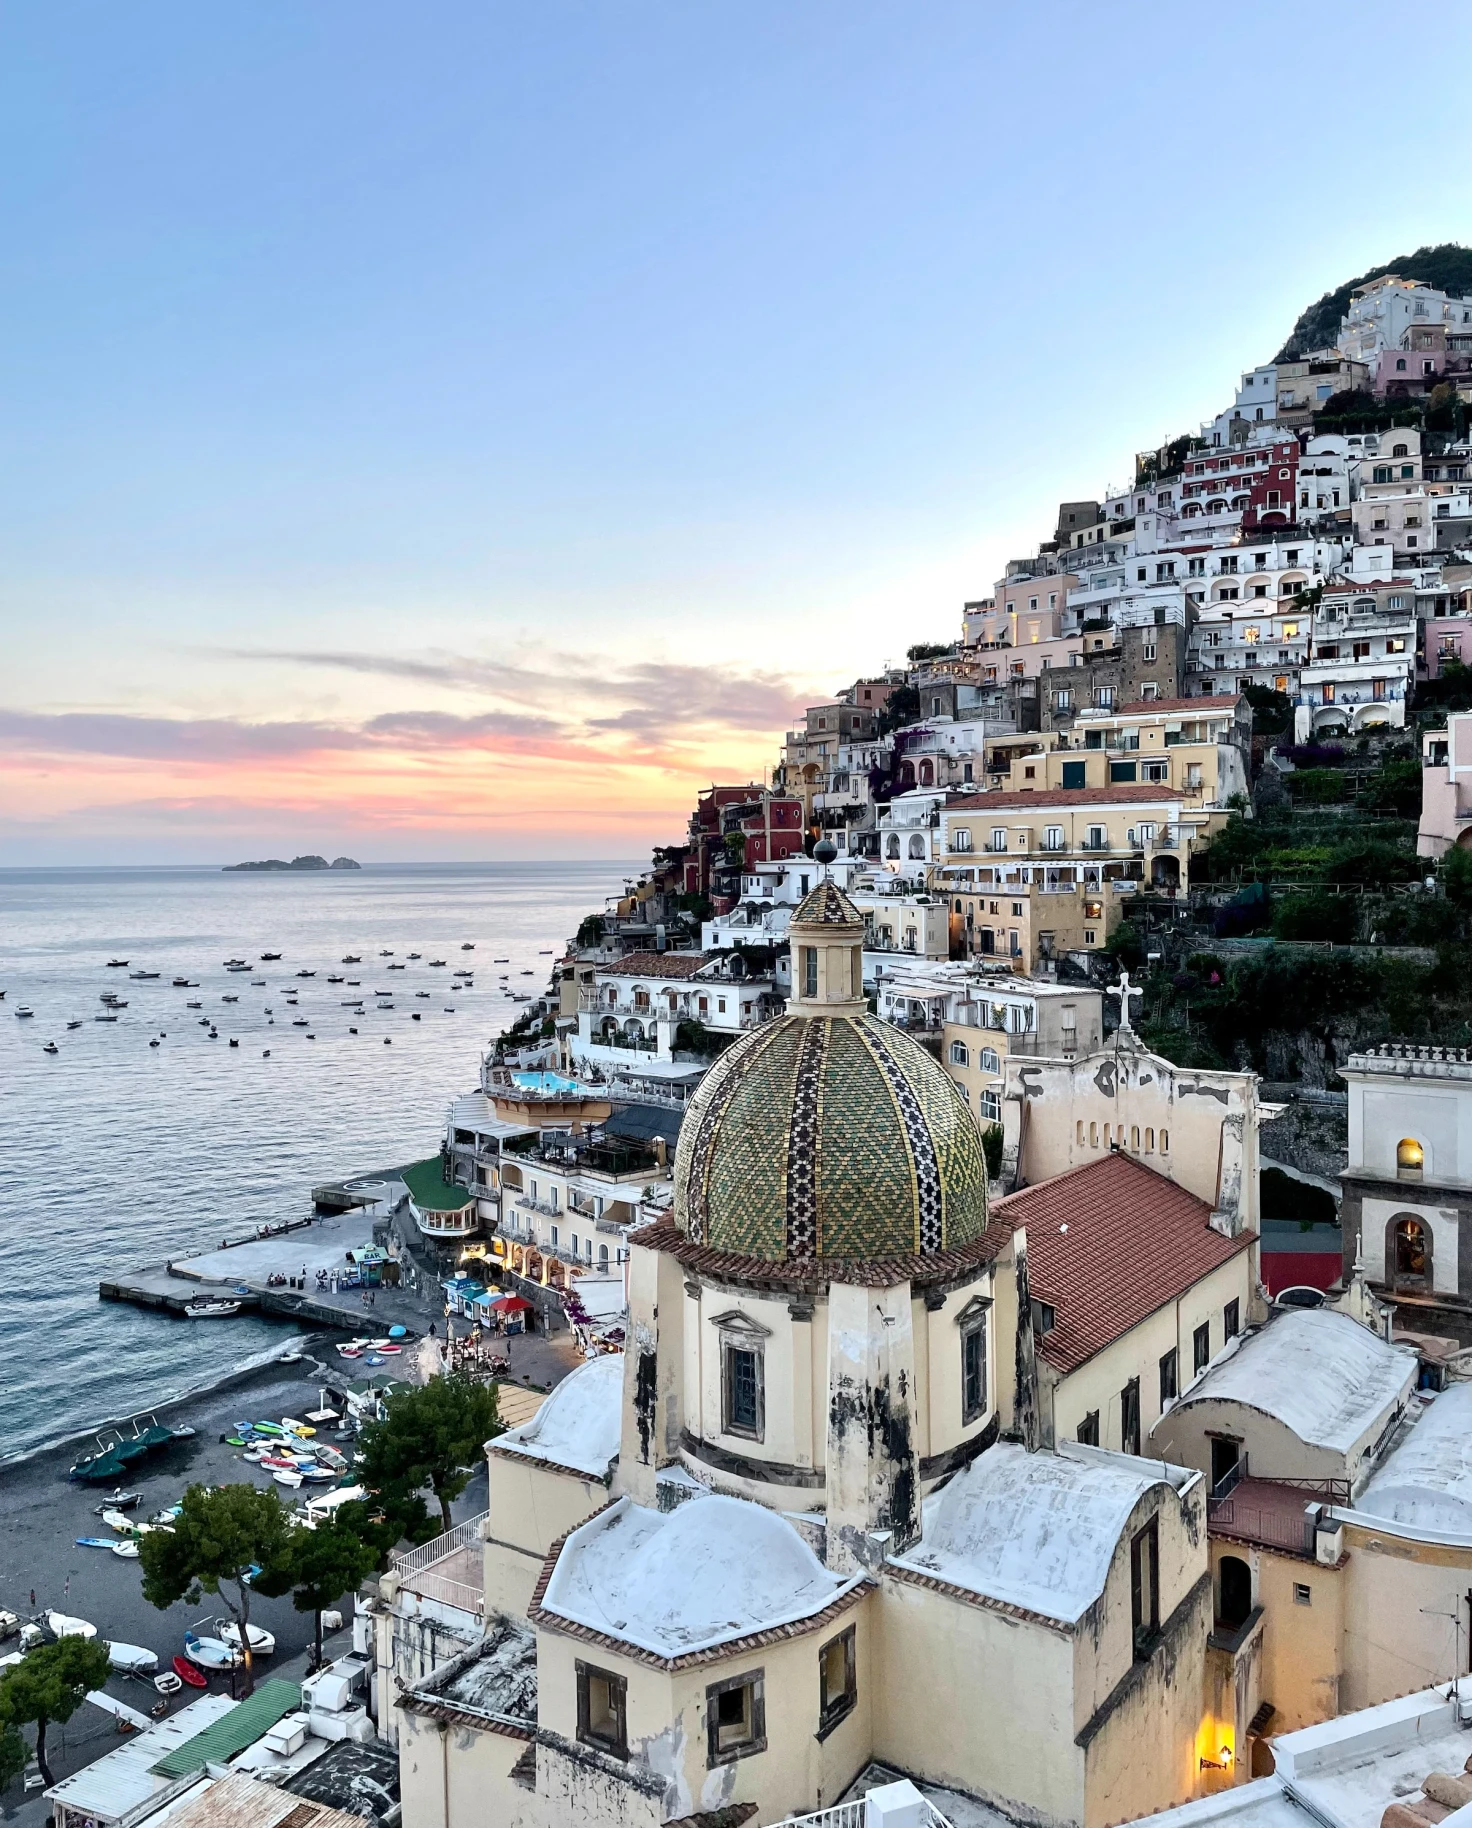 You can enjoy both the city and the beach in Rome and Positano.